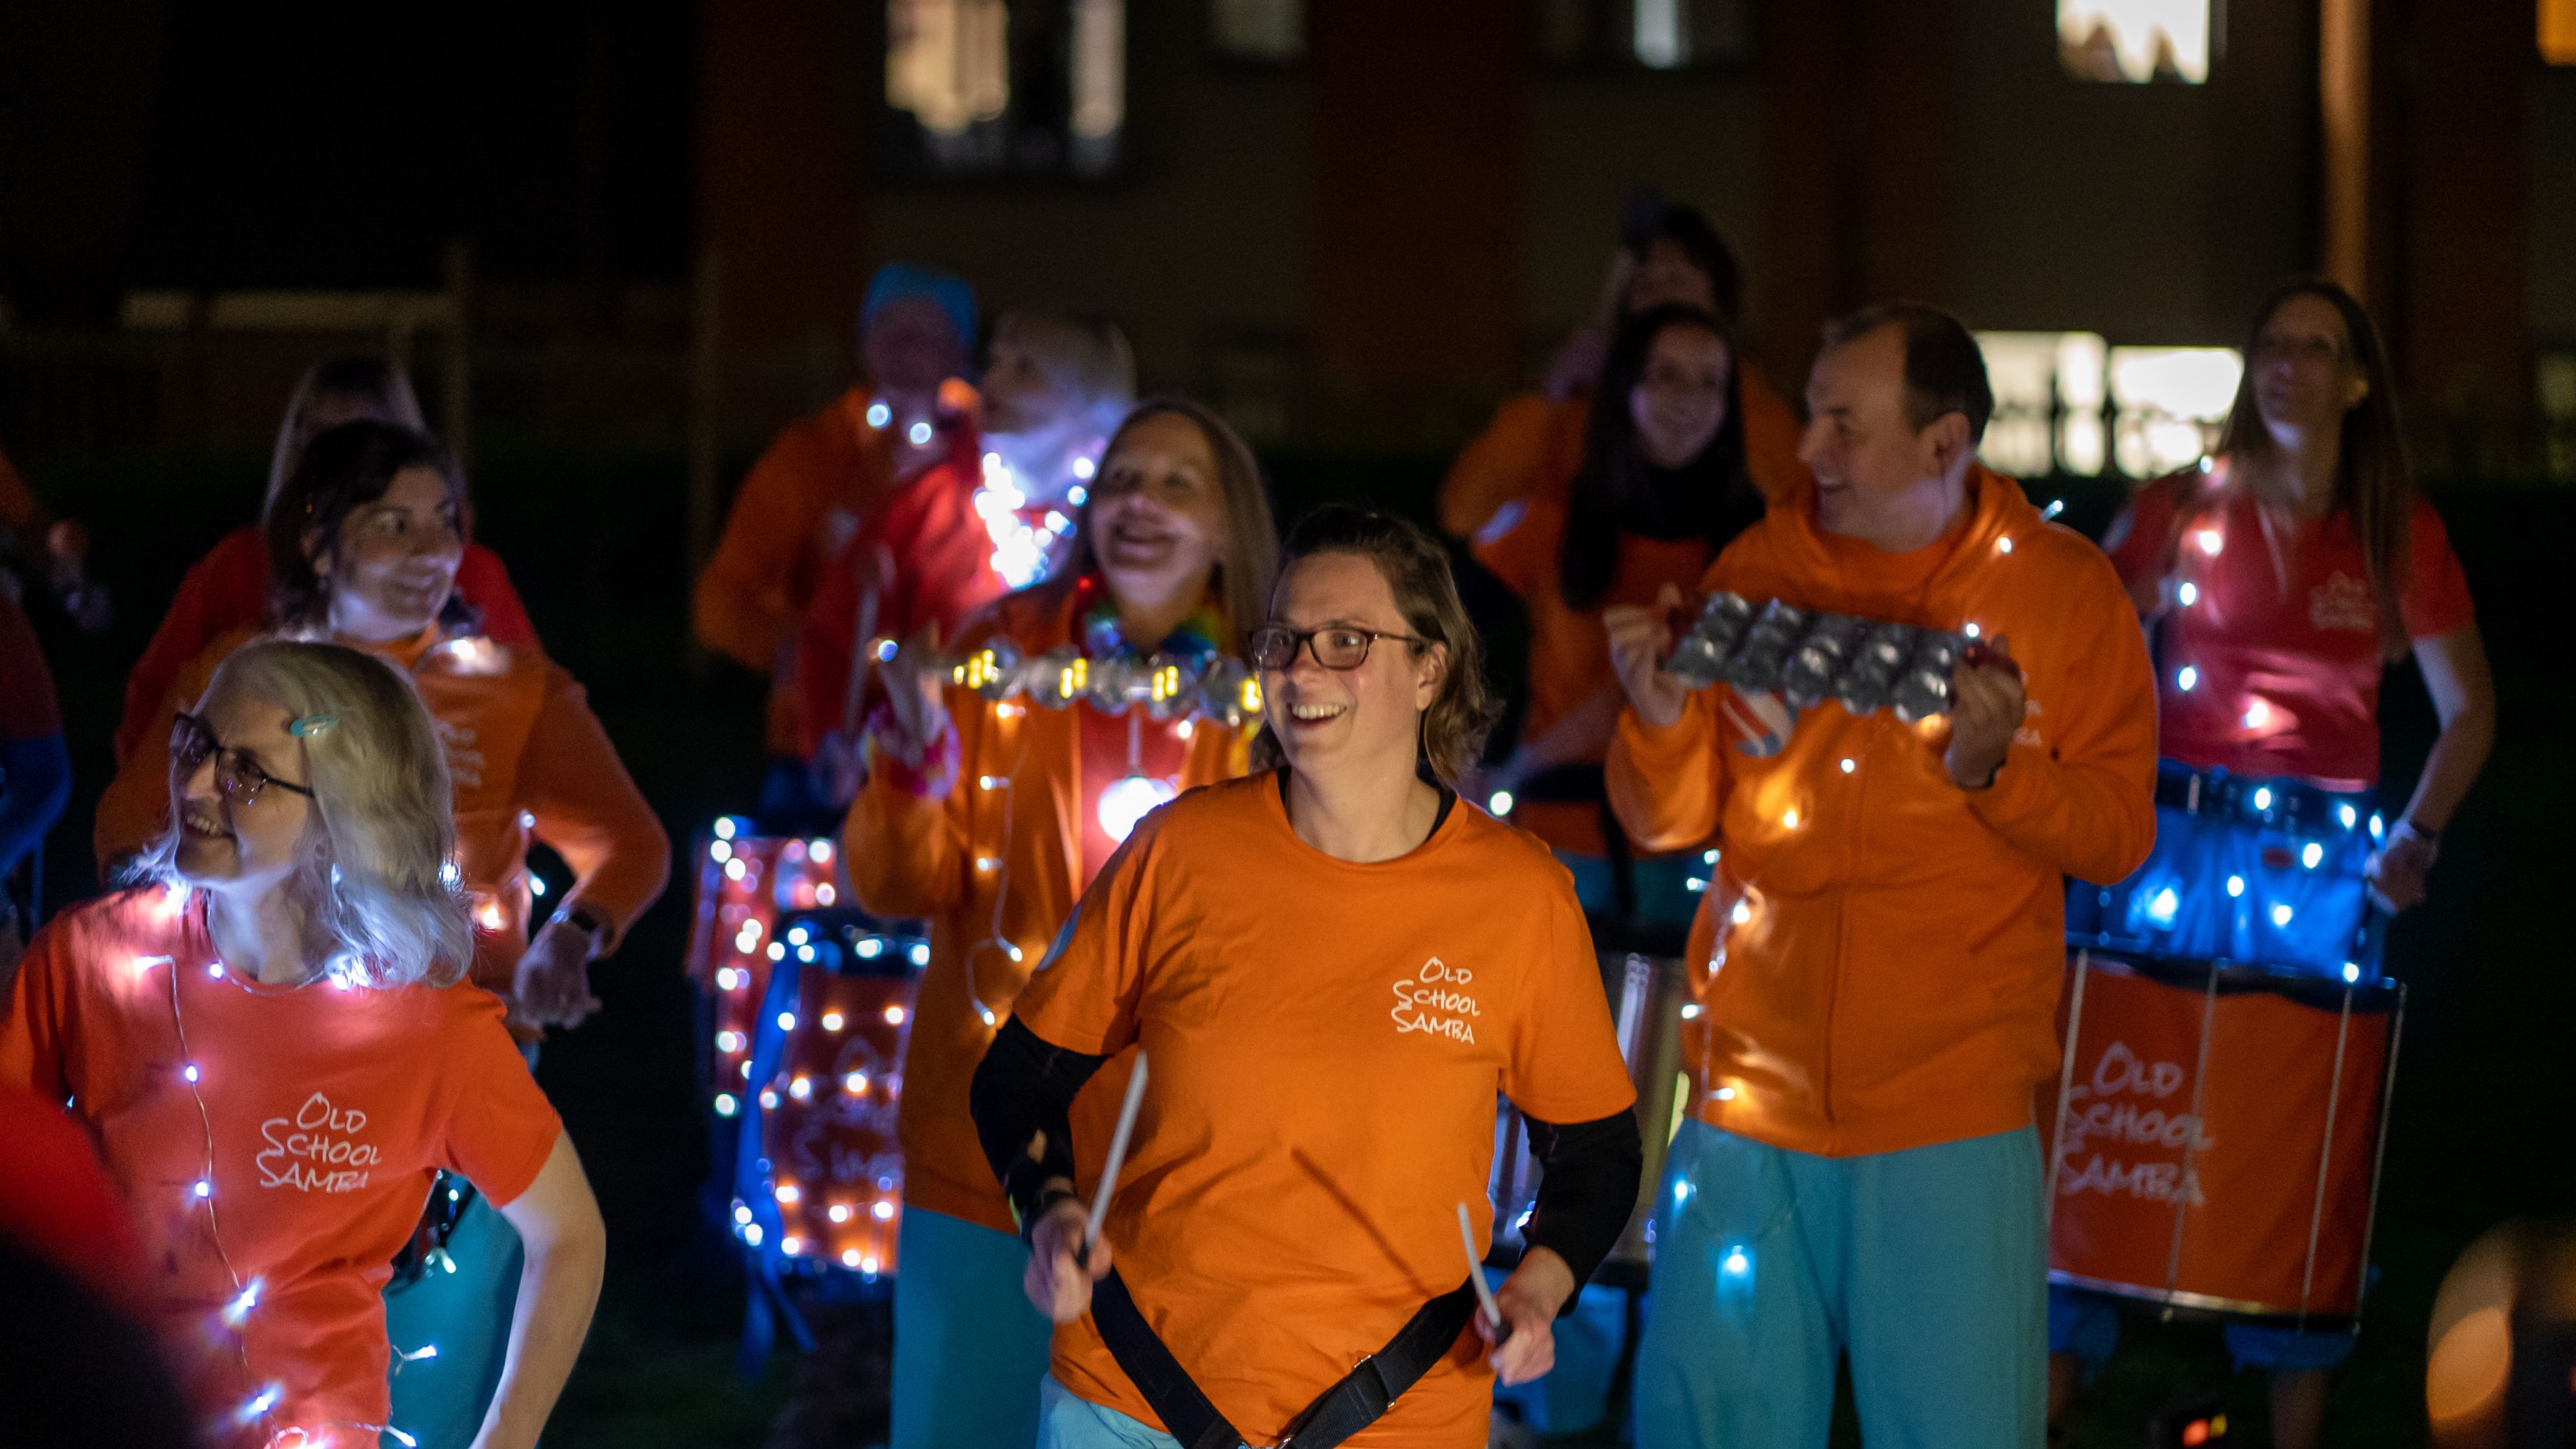 Image of Old School Samba Band playing instruments with fairy lighting